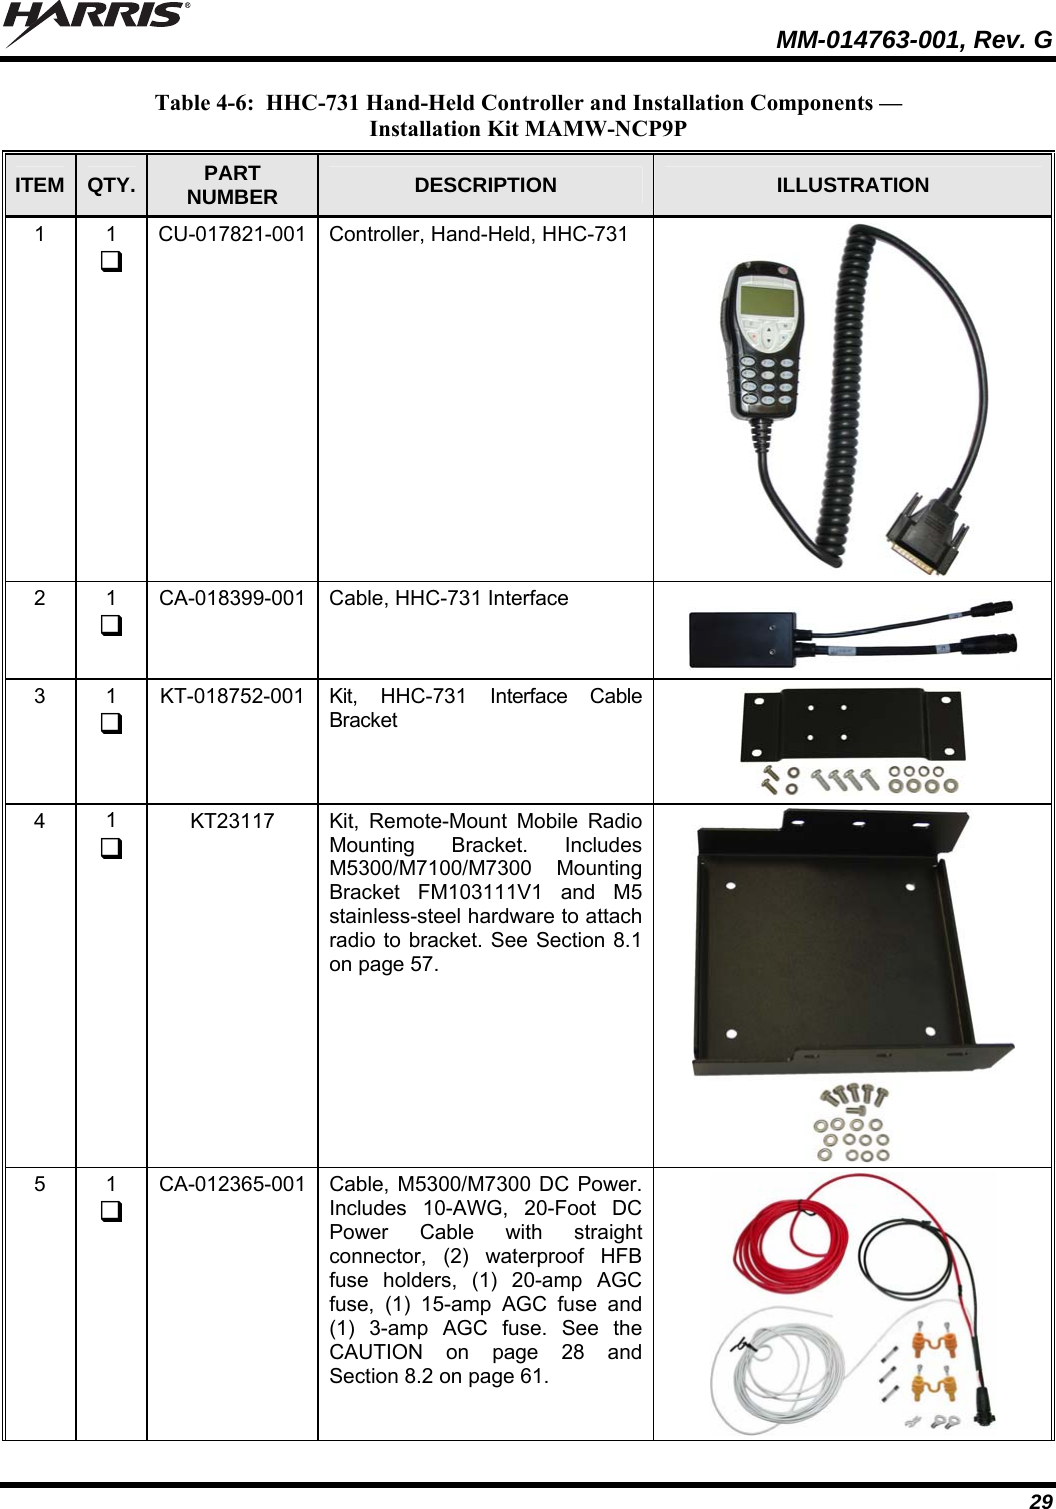   MM-014763-001, Rev. G 29 Table 4-6:  HHC-731 Hand-Held Controller and Installation Components —  Installation Kit MAMW-NCP9P ITEM  QTY.  PART NUMBER  DESCRIPTION  ILLUSTRATION 1  1  CU-017821-001  Controller, Hand-Held, HHC-731  2  1  CA-018399-001  Cable, HHC-731 Interface  3  1  KT-018752-001  Kit, HHC-731 Interface Cable Bracket  4  1  KT23117  Kit, Remote-Mount Mobile Radio Mounting Bracket. Includes M5300/M7100/M7300 Mounting Bracket FM103111V1 and M5 stainless-steel hardware to attach radio to bracket. See Section 8.1 on page 57.  5  1  CA-012365-001  Cable, M5300/M7300 DC Power. Includes 10-AWG, 20-Foot DC Power Cable with straight connector, (2) waterproof HFB fuse holders, (1) 20-amp AGC fuse, (1) 15-amp AGC fuse and (1) 3-amp AGC fuse. See the CAUTION on page 28 and Section 8.2 on page 61.  